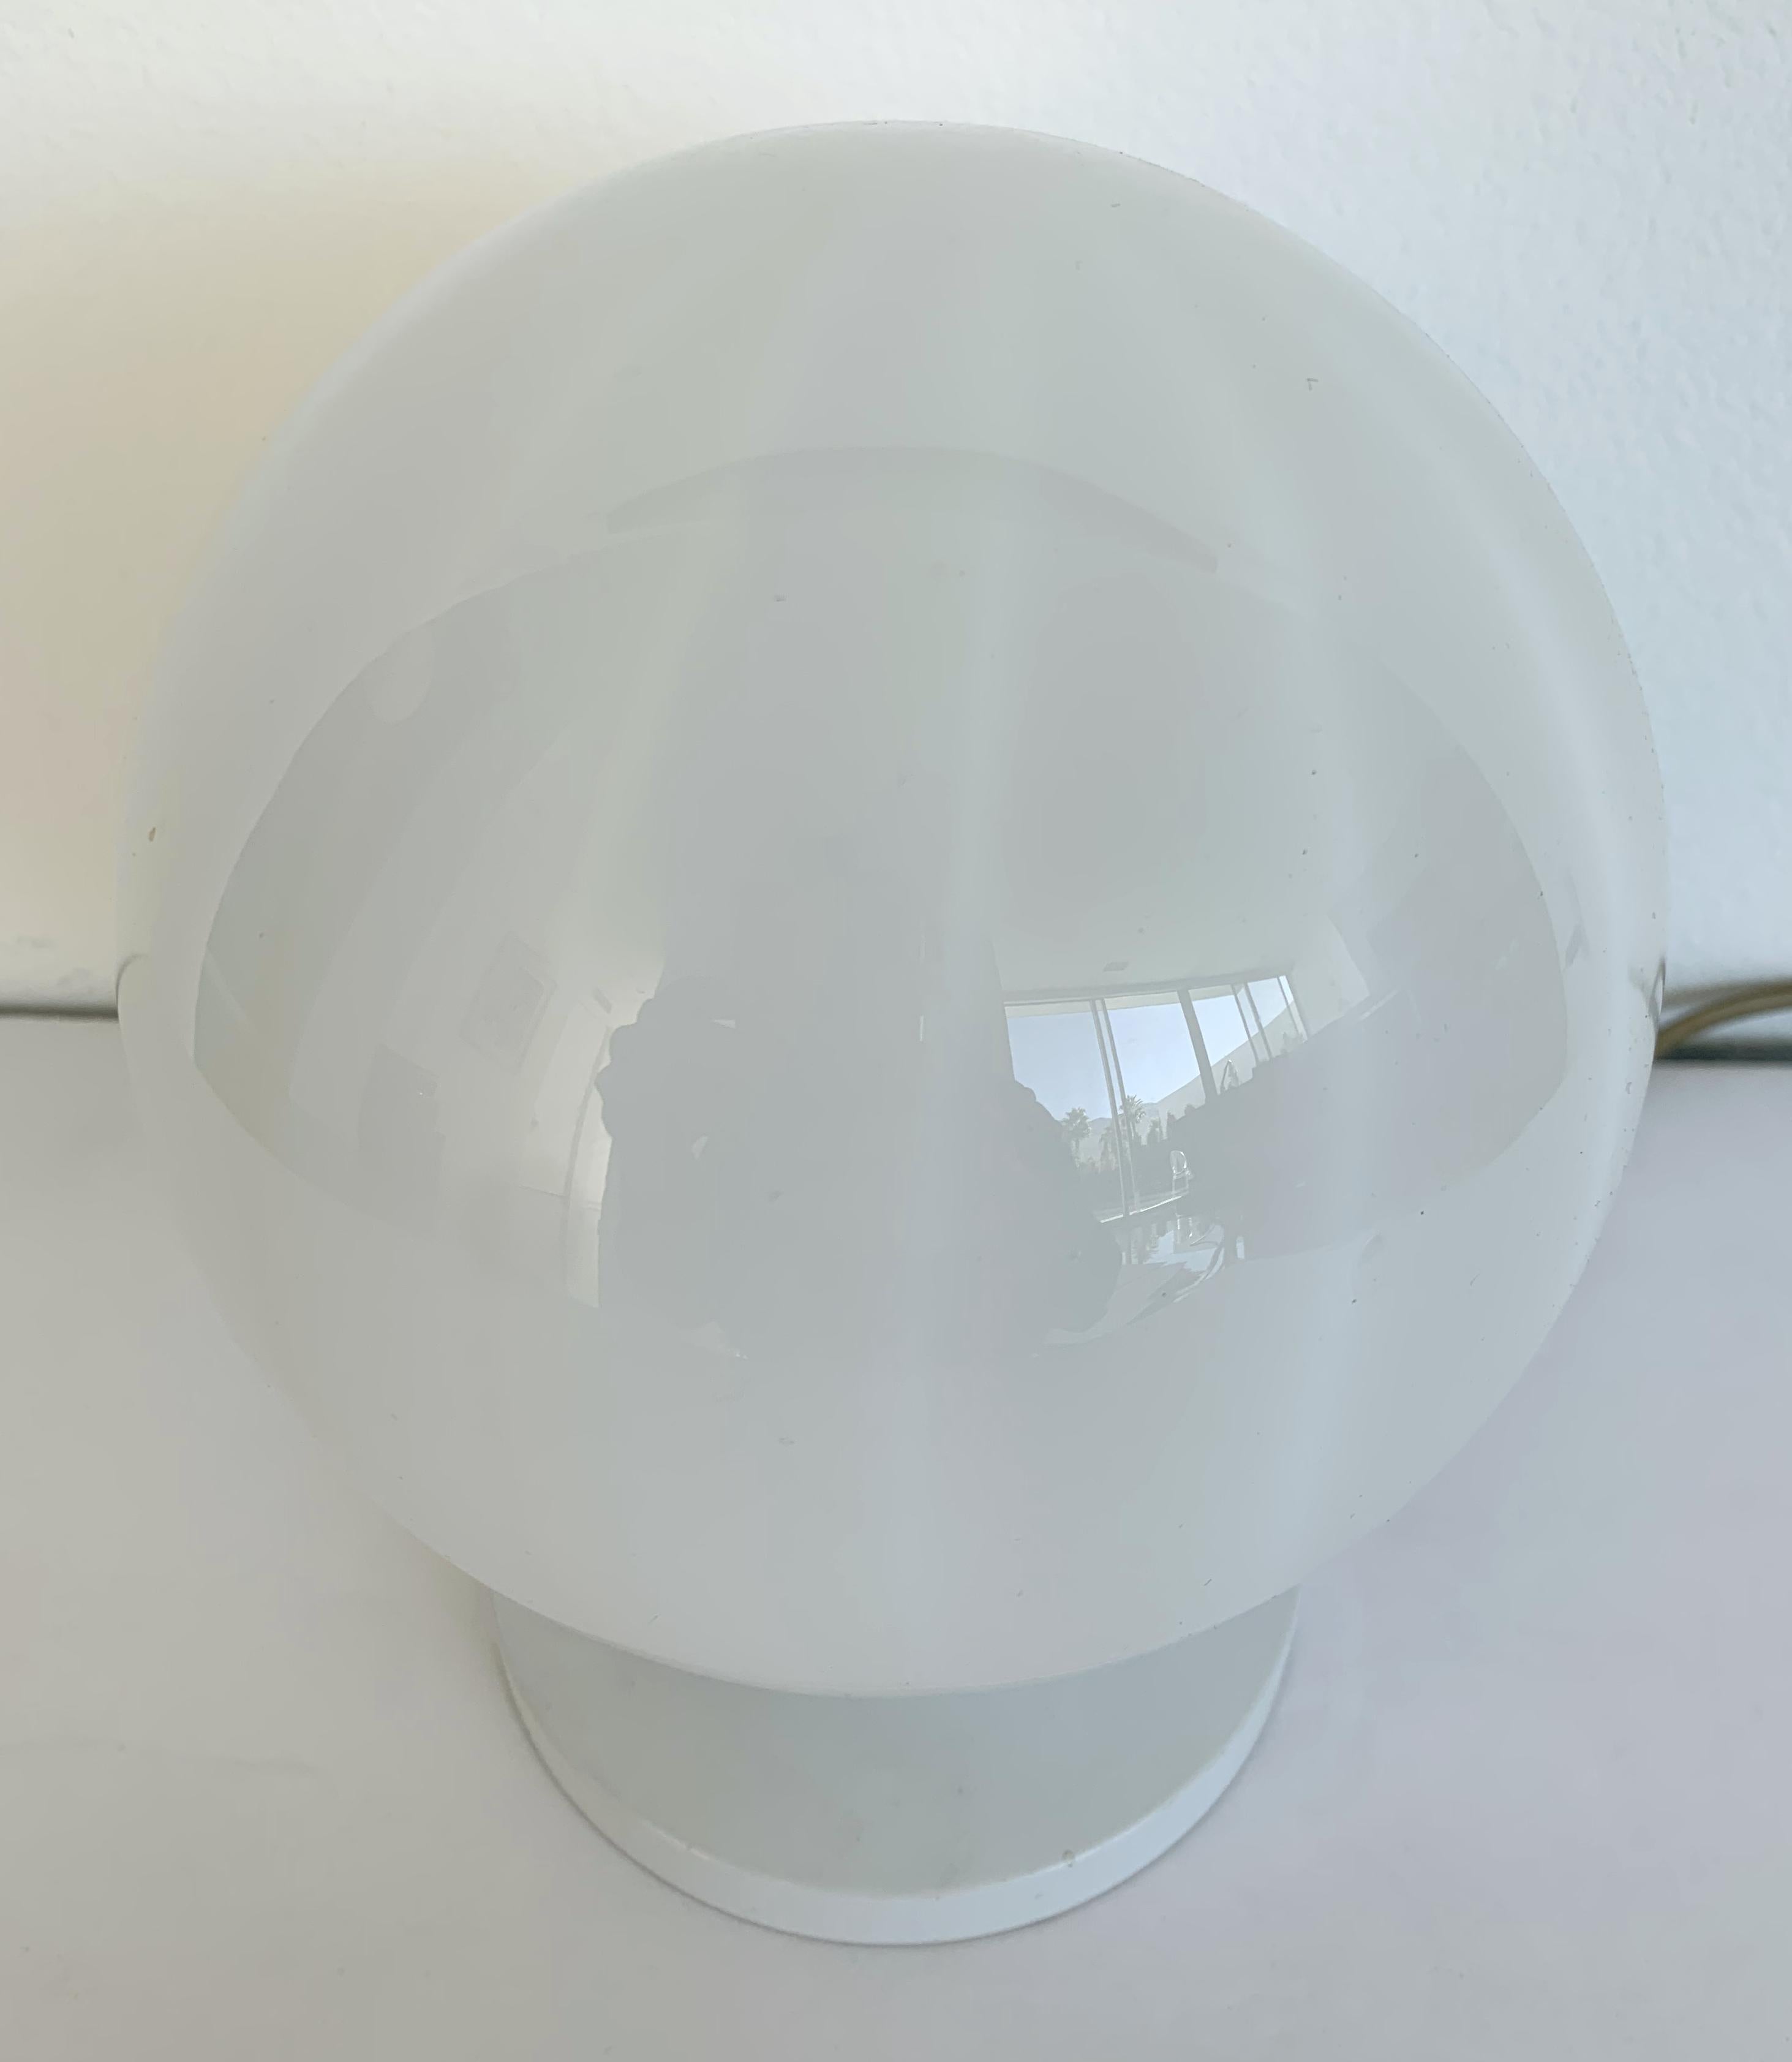 Vintage Italian desk lamp with a striped white hand blown Murano glass shade mounted on white metal base, made in Italy, circa 1960s
1 light / E12 or E14 type / max 40W
Measures: height 8 inches, diameter 6 inches
Order Reference #: FABIOLTD L104